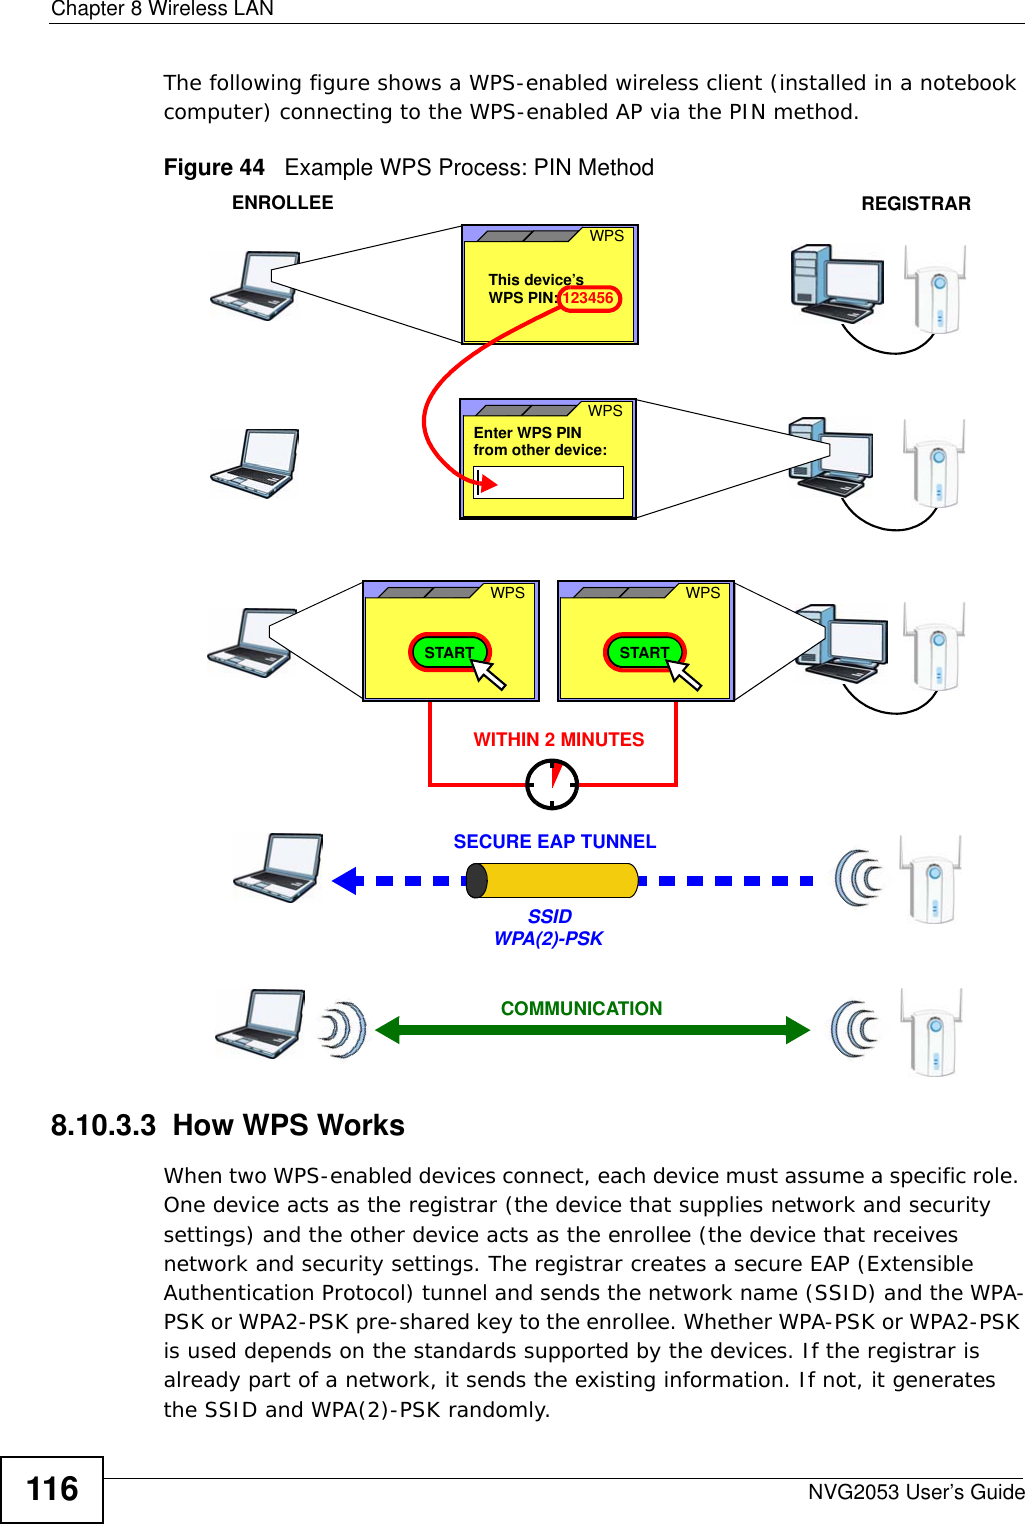 Chapter 8 Wireless LANNVG2053 User’s Guide116The following figure shows a WPS-enabled wireless client (installed in a notebook computer) connecting to the WPS-enabled AP via the PIN method.Figure 44   Example WPS Process: PIN Method8.10.3.3  How WPS WorksWhen two WPS-enabled devices connect, each device must assume a specific role. One device acts as the registrar (the device that supplies network and security settings) and the other device acts as the enrollee (the device that receives network and security settings. The registrar creates a secure EAP (Extensible Authentication Protocol) tunnel and sends the network name (SSID) and the WPA-PSK or WPA2-PSK pre-shared key to the enrollee. Whether WPA-PSK or WPA2-PSK is used depends on the standards supported by the devices. If the registrar is already part of a network, it sends the existing information. If not, it generates the SSID and WPA(2)-PSK randomly.ENROLLEESECURE EAP TUNNELSSIDWPA(2)-PSKWITHIN 2 MINUTESCOMMUNICATIONThis device’s WPSEnter WPS PIN  WPSfrom other device: WPS PIN: 123456WPSSTARTWPSSTARTREGISTRAR